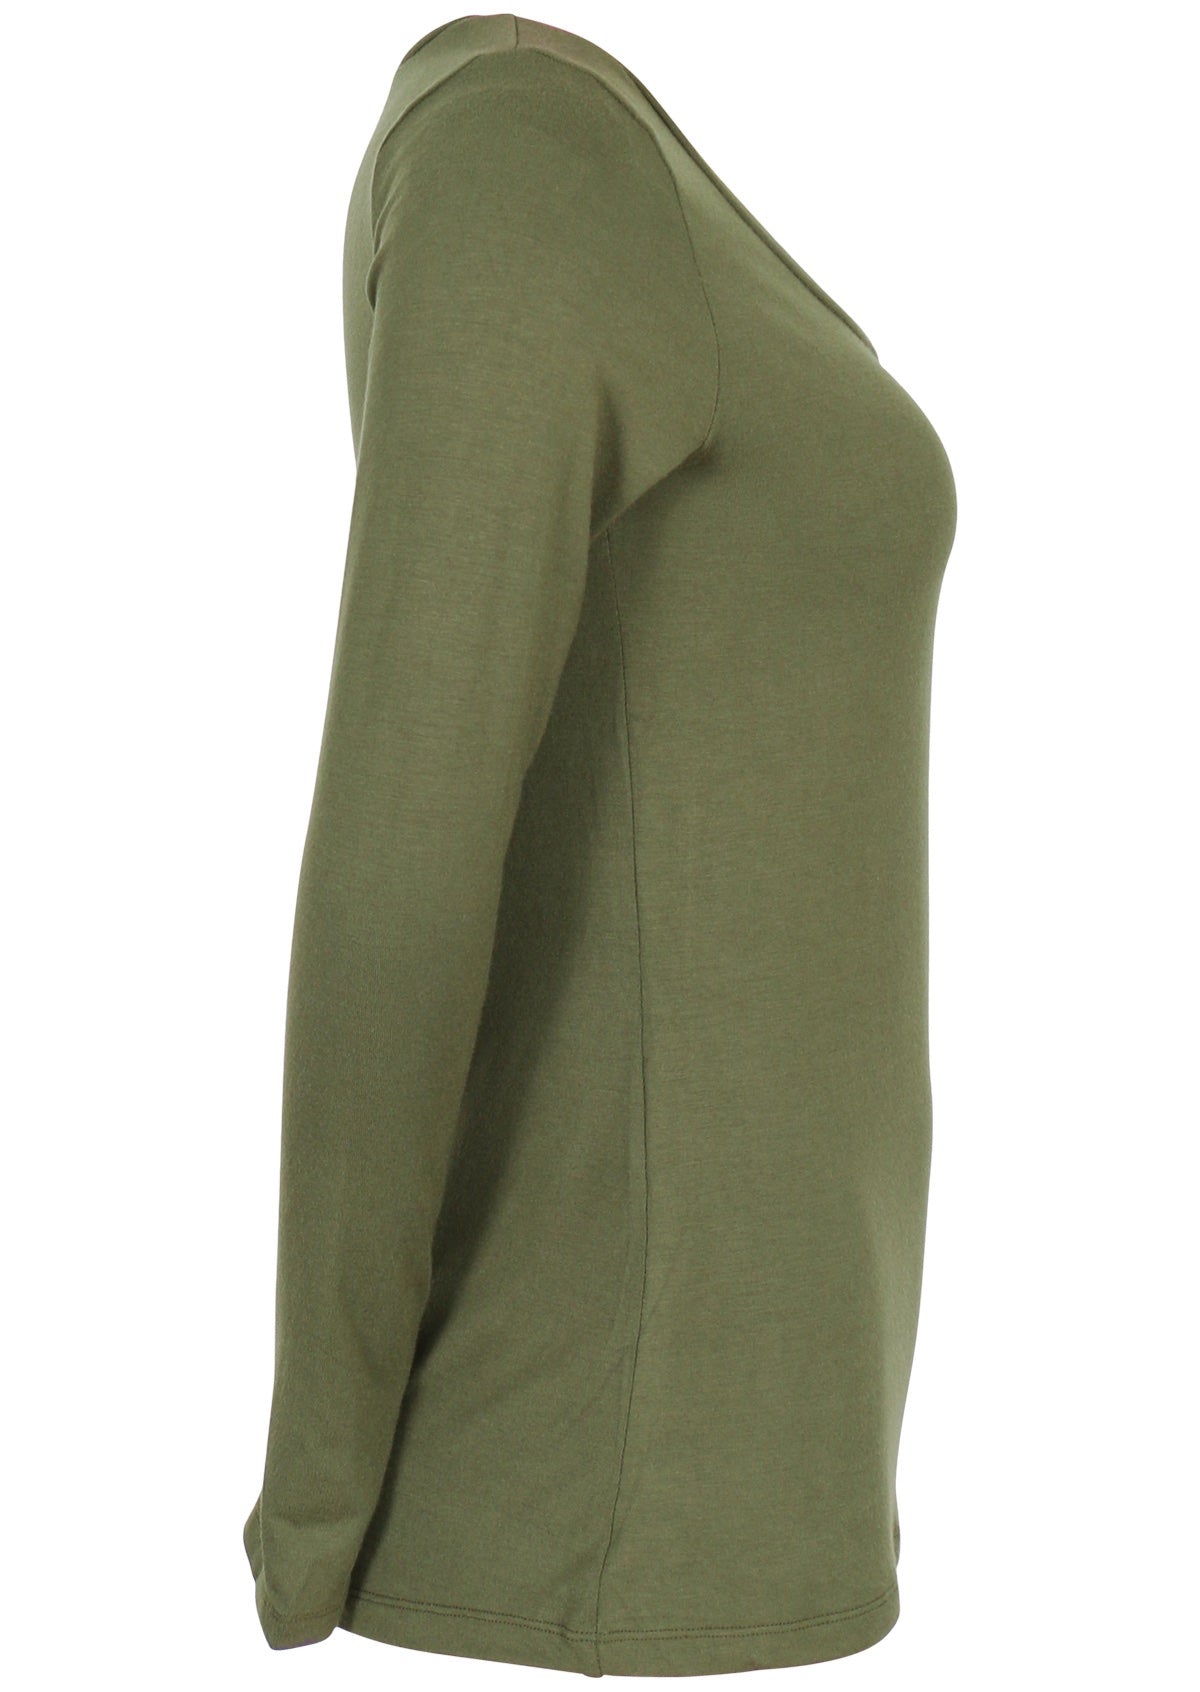 Side view of women's olive green long sleeve stretch v-neck soft rayon top.